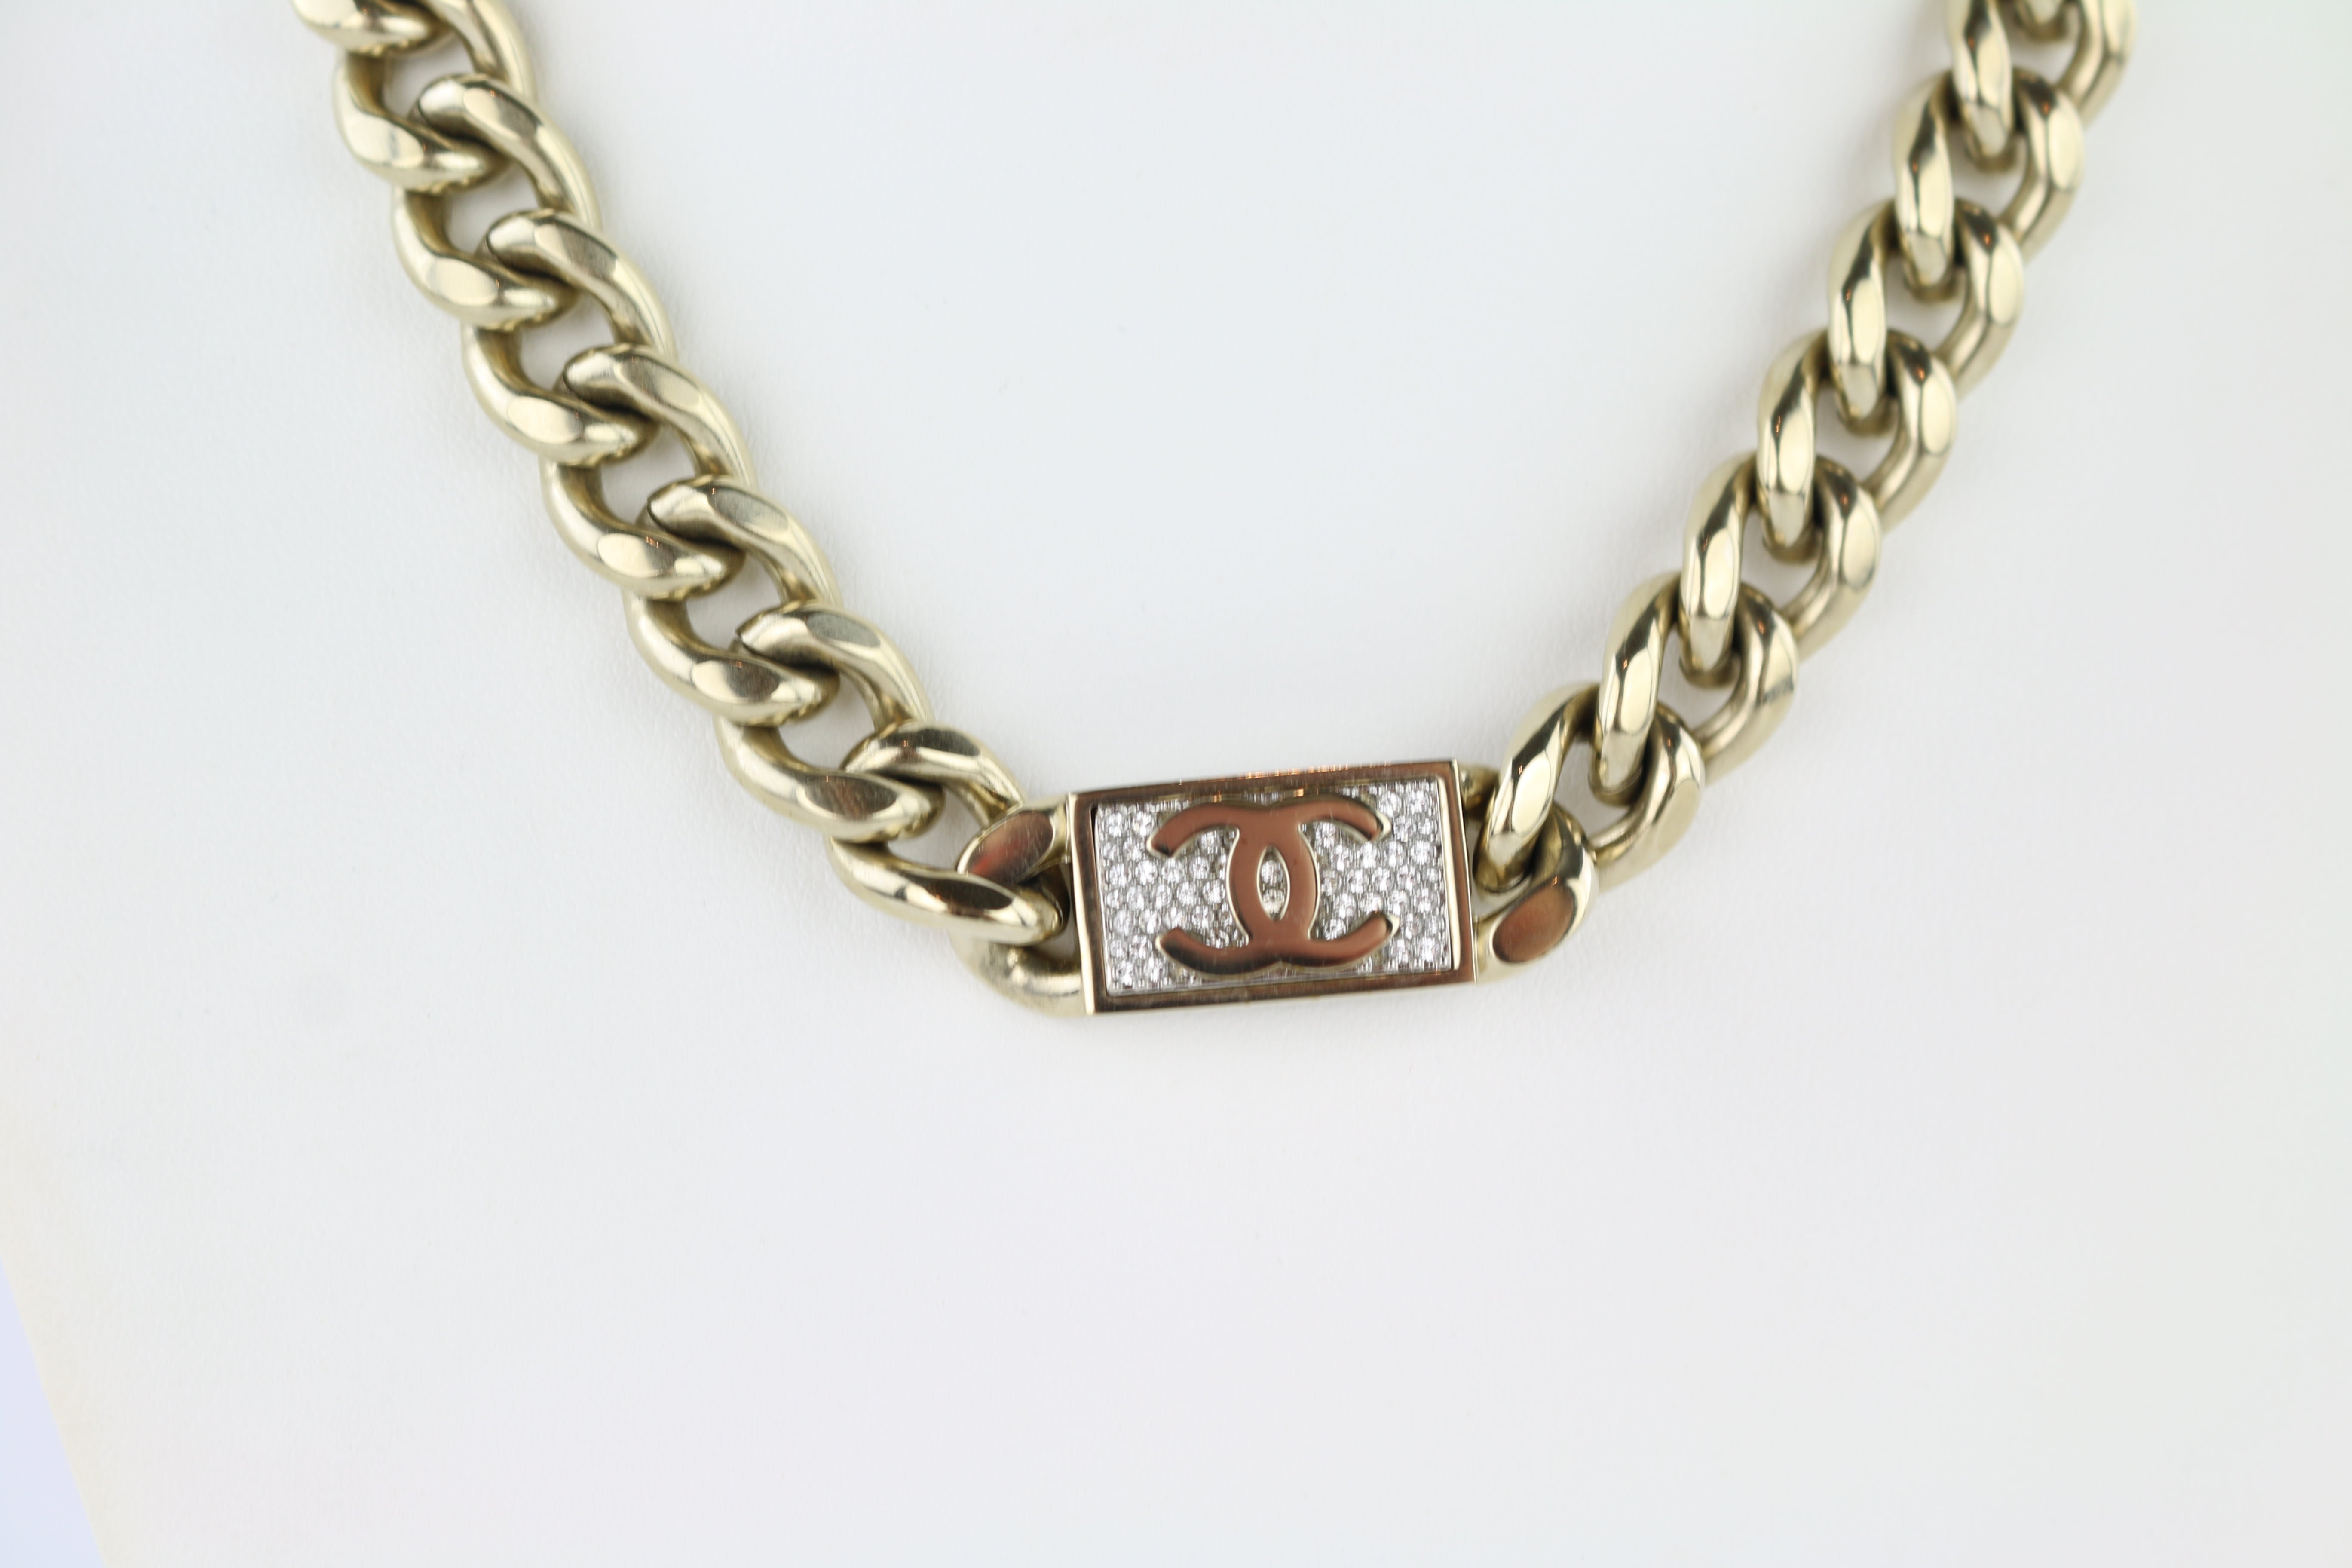 Gold/Crystal CC Chain Link Choker Necklace